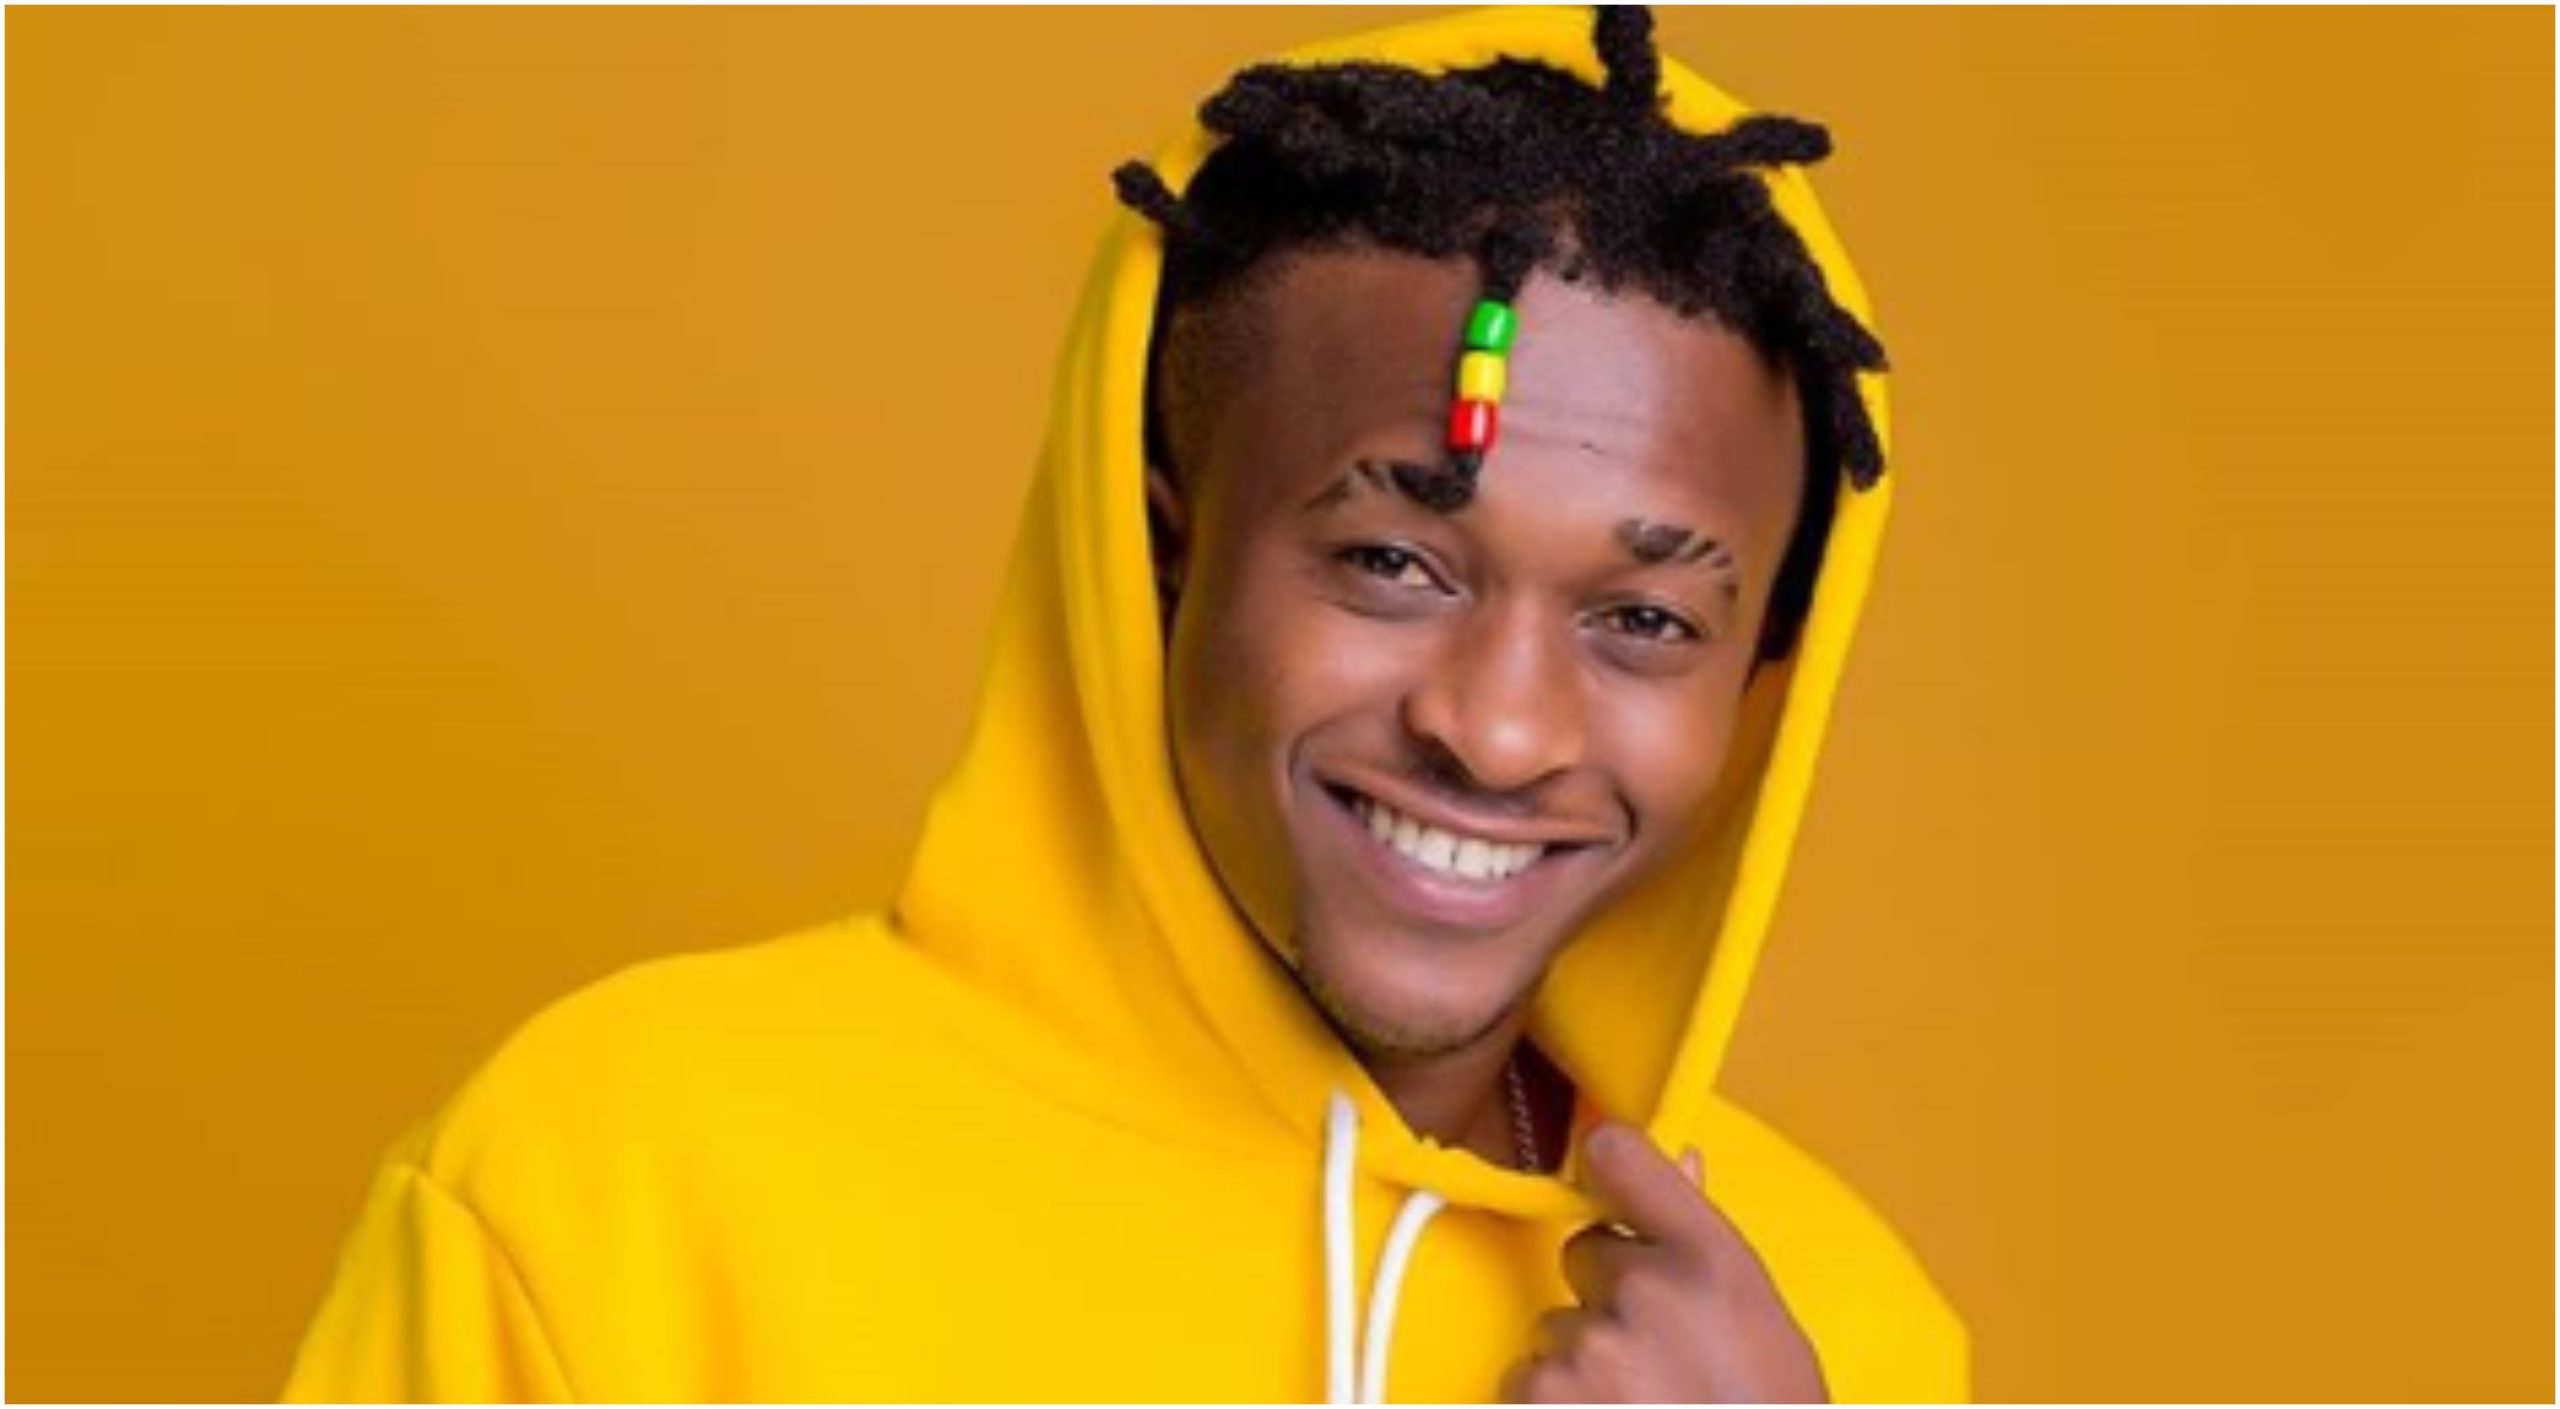 Miracle Baby introduces new gorgeous girlfriend to fans (Photo)